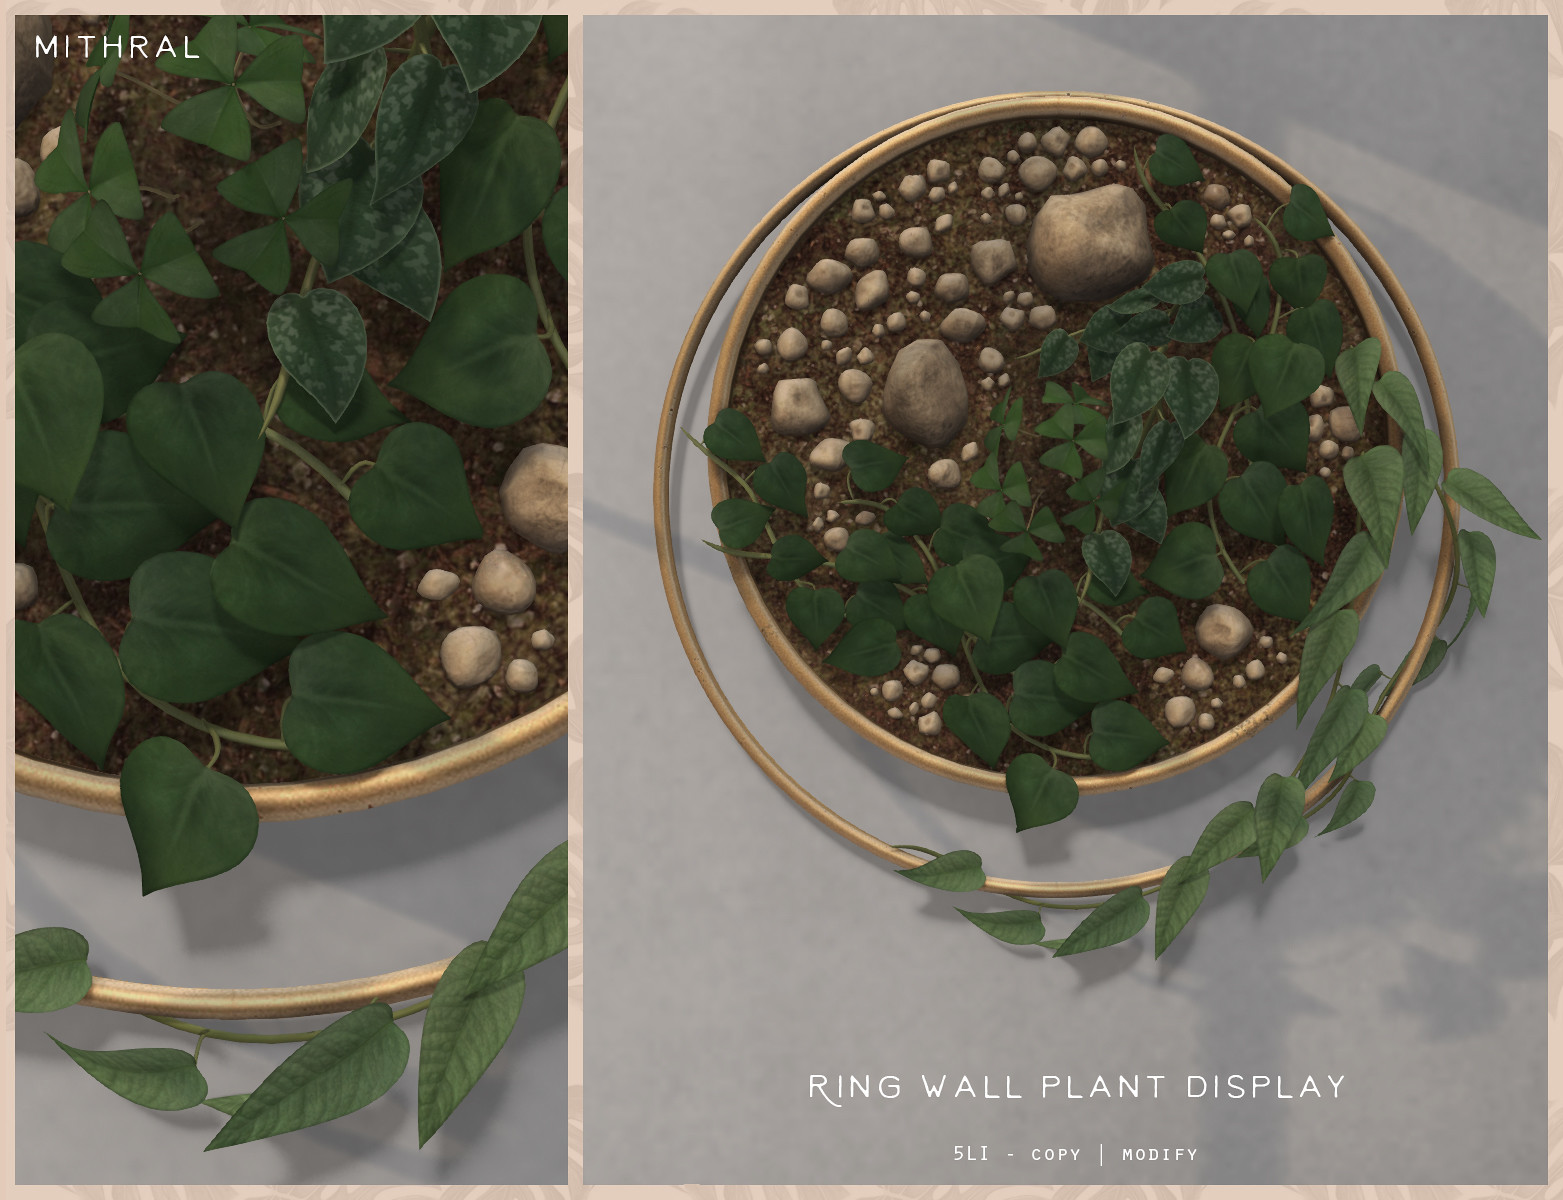 Mithral – Ring Wall Plant Display